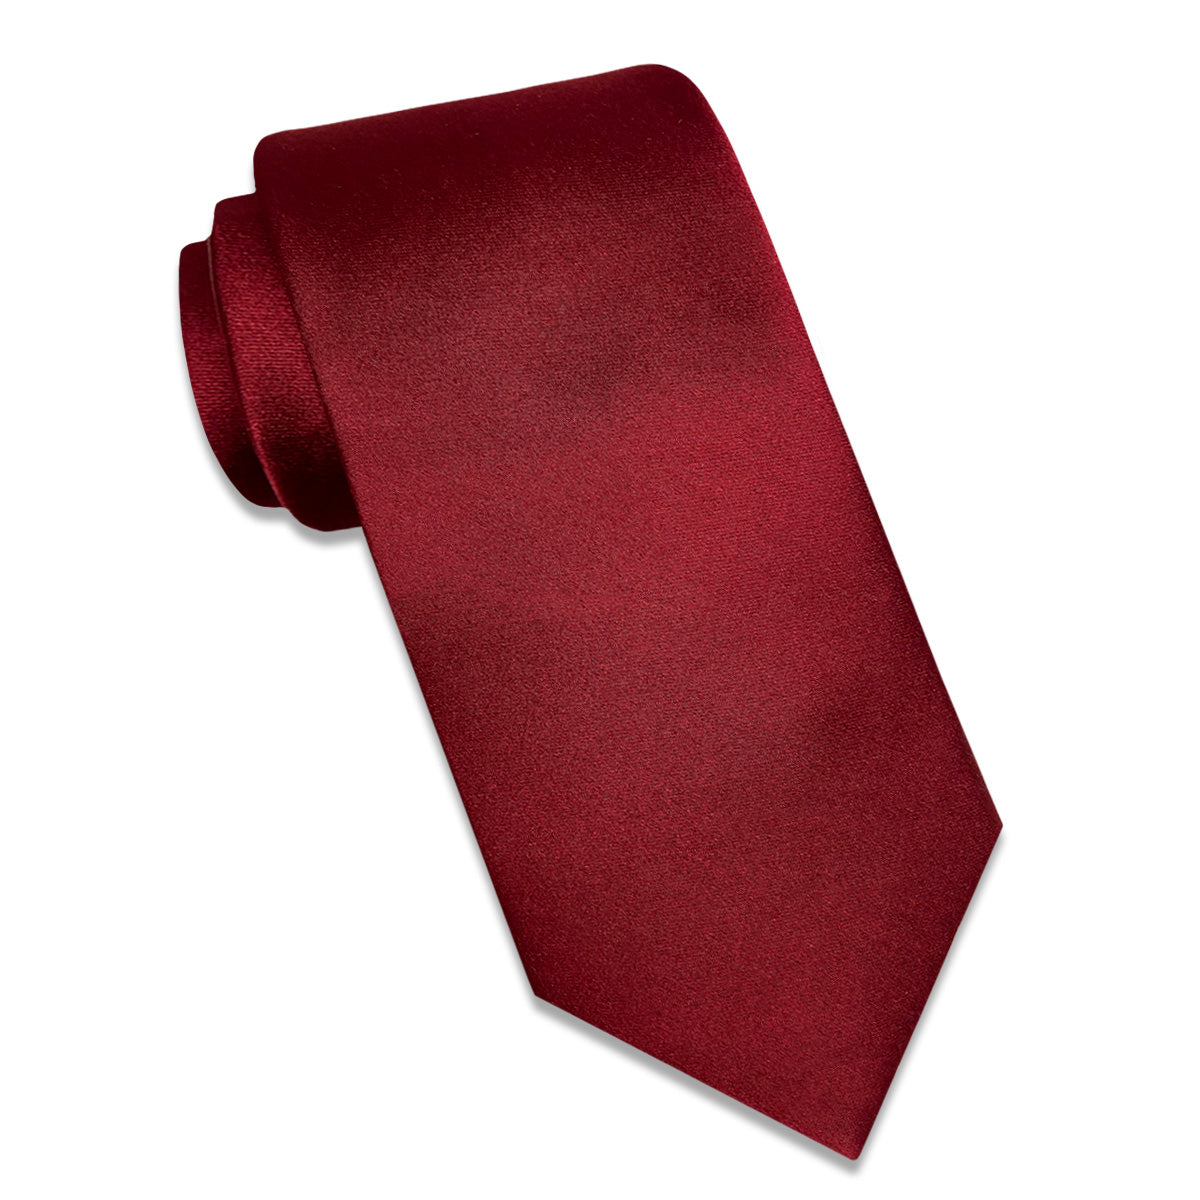 The Tie Collection - H by Steve Harvey